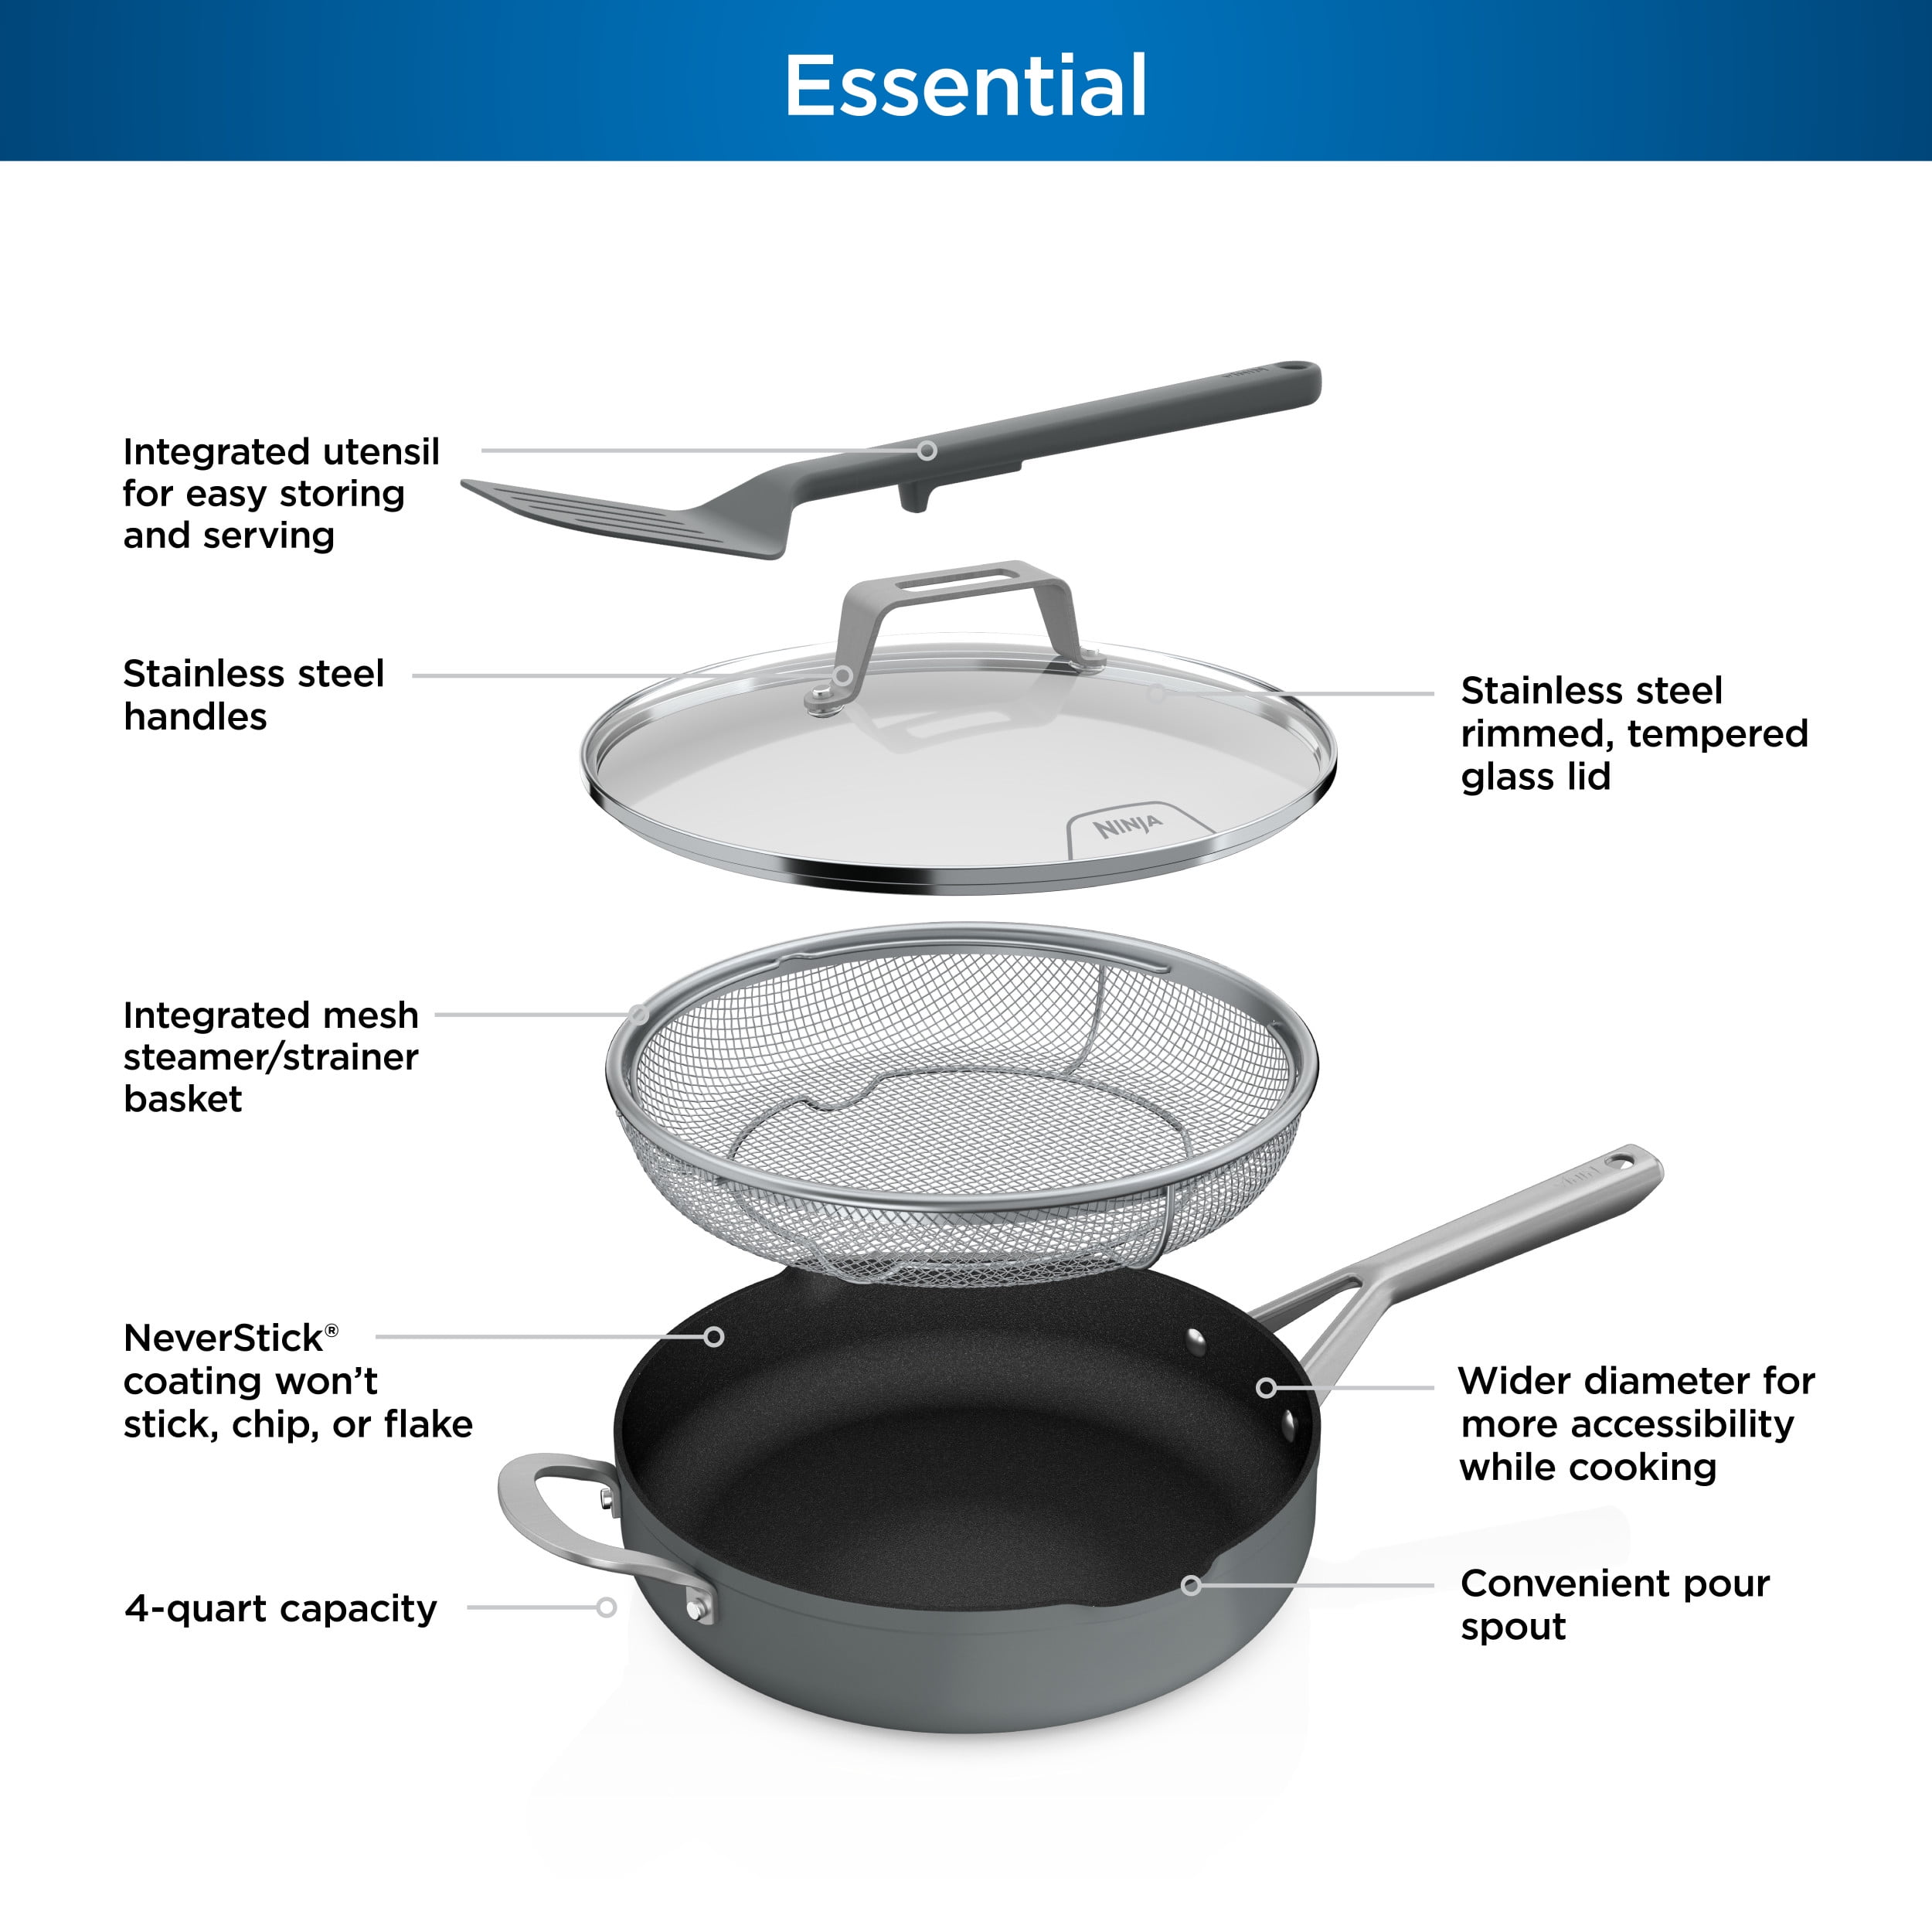  Ninja CW102GY Foodi NeverStick PossiblePan, Premium Set, Sea  Salt Grey & C30020 Foodi NeverStick Premium 8-Inch Fry Pan, Hard-Anodized,  Nonstick, Durable & Oven Safe to 500°F, Slate Grey : Home 